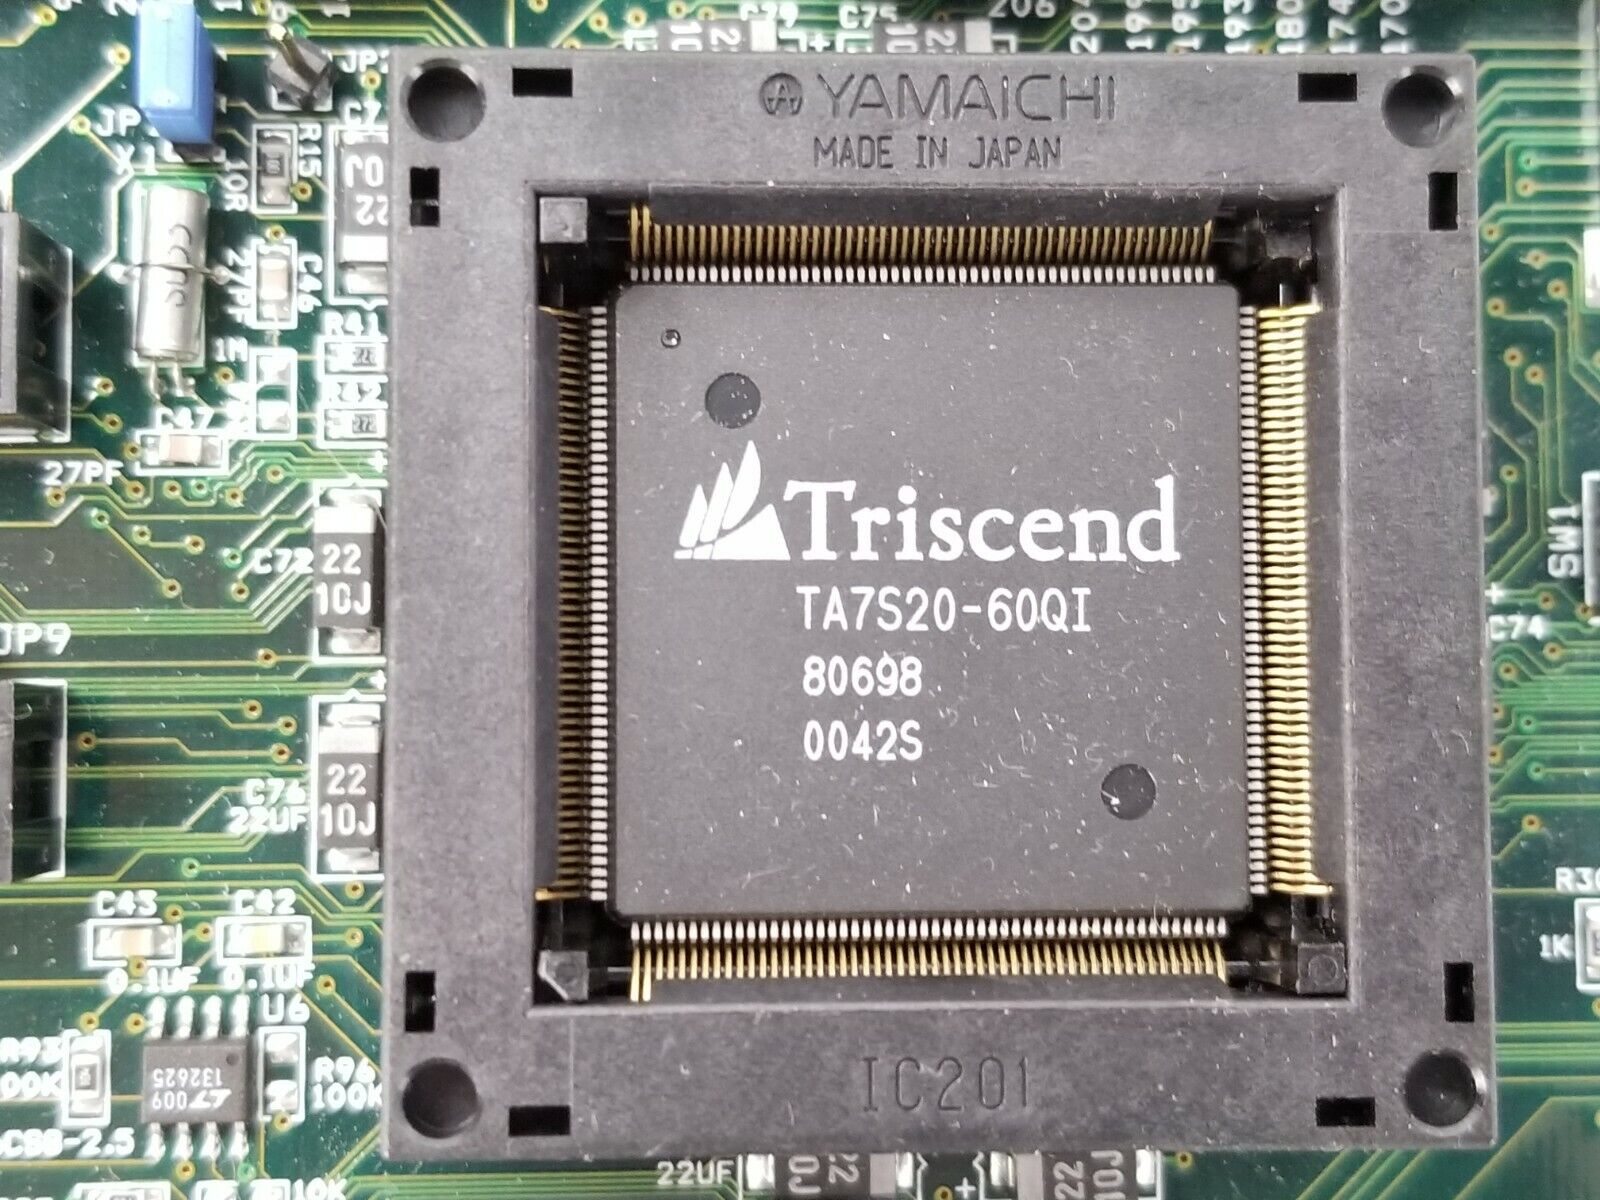 Triscend Evaluation Board Rev D THW DVD-7.20 With 64MB SODIMM